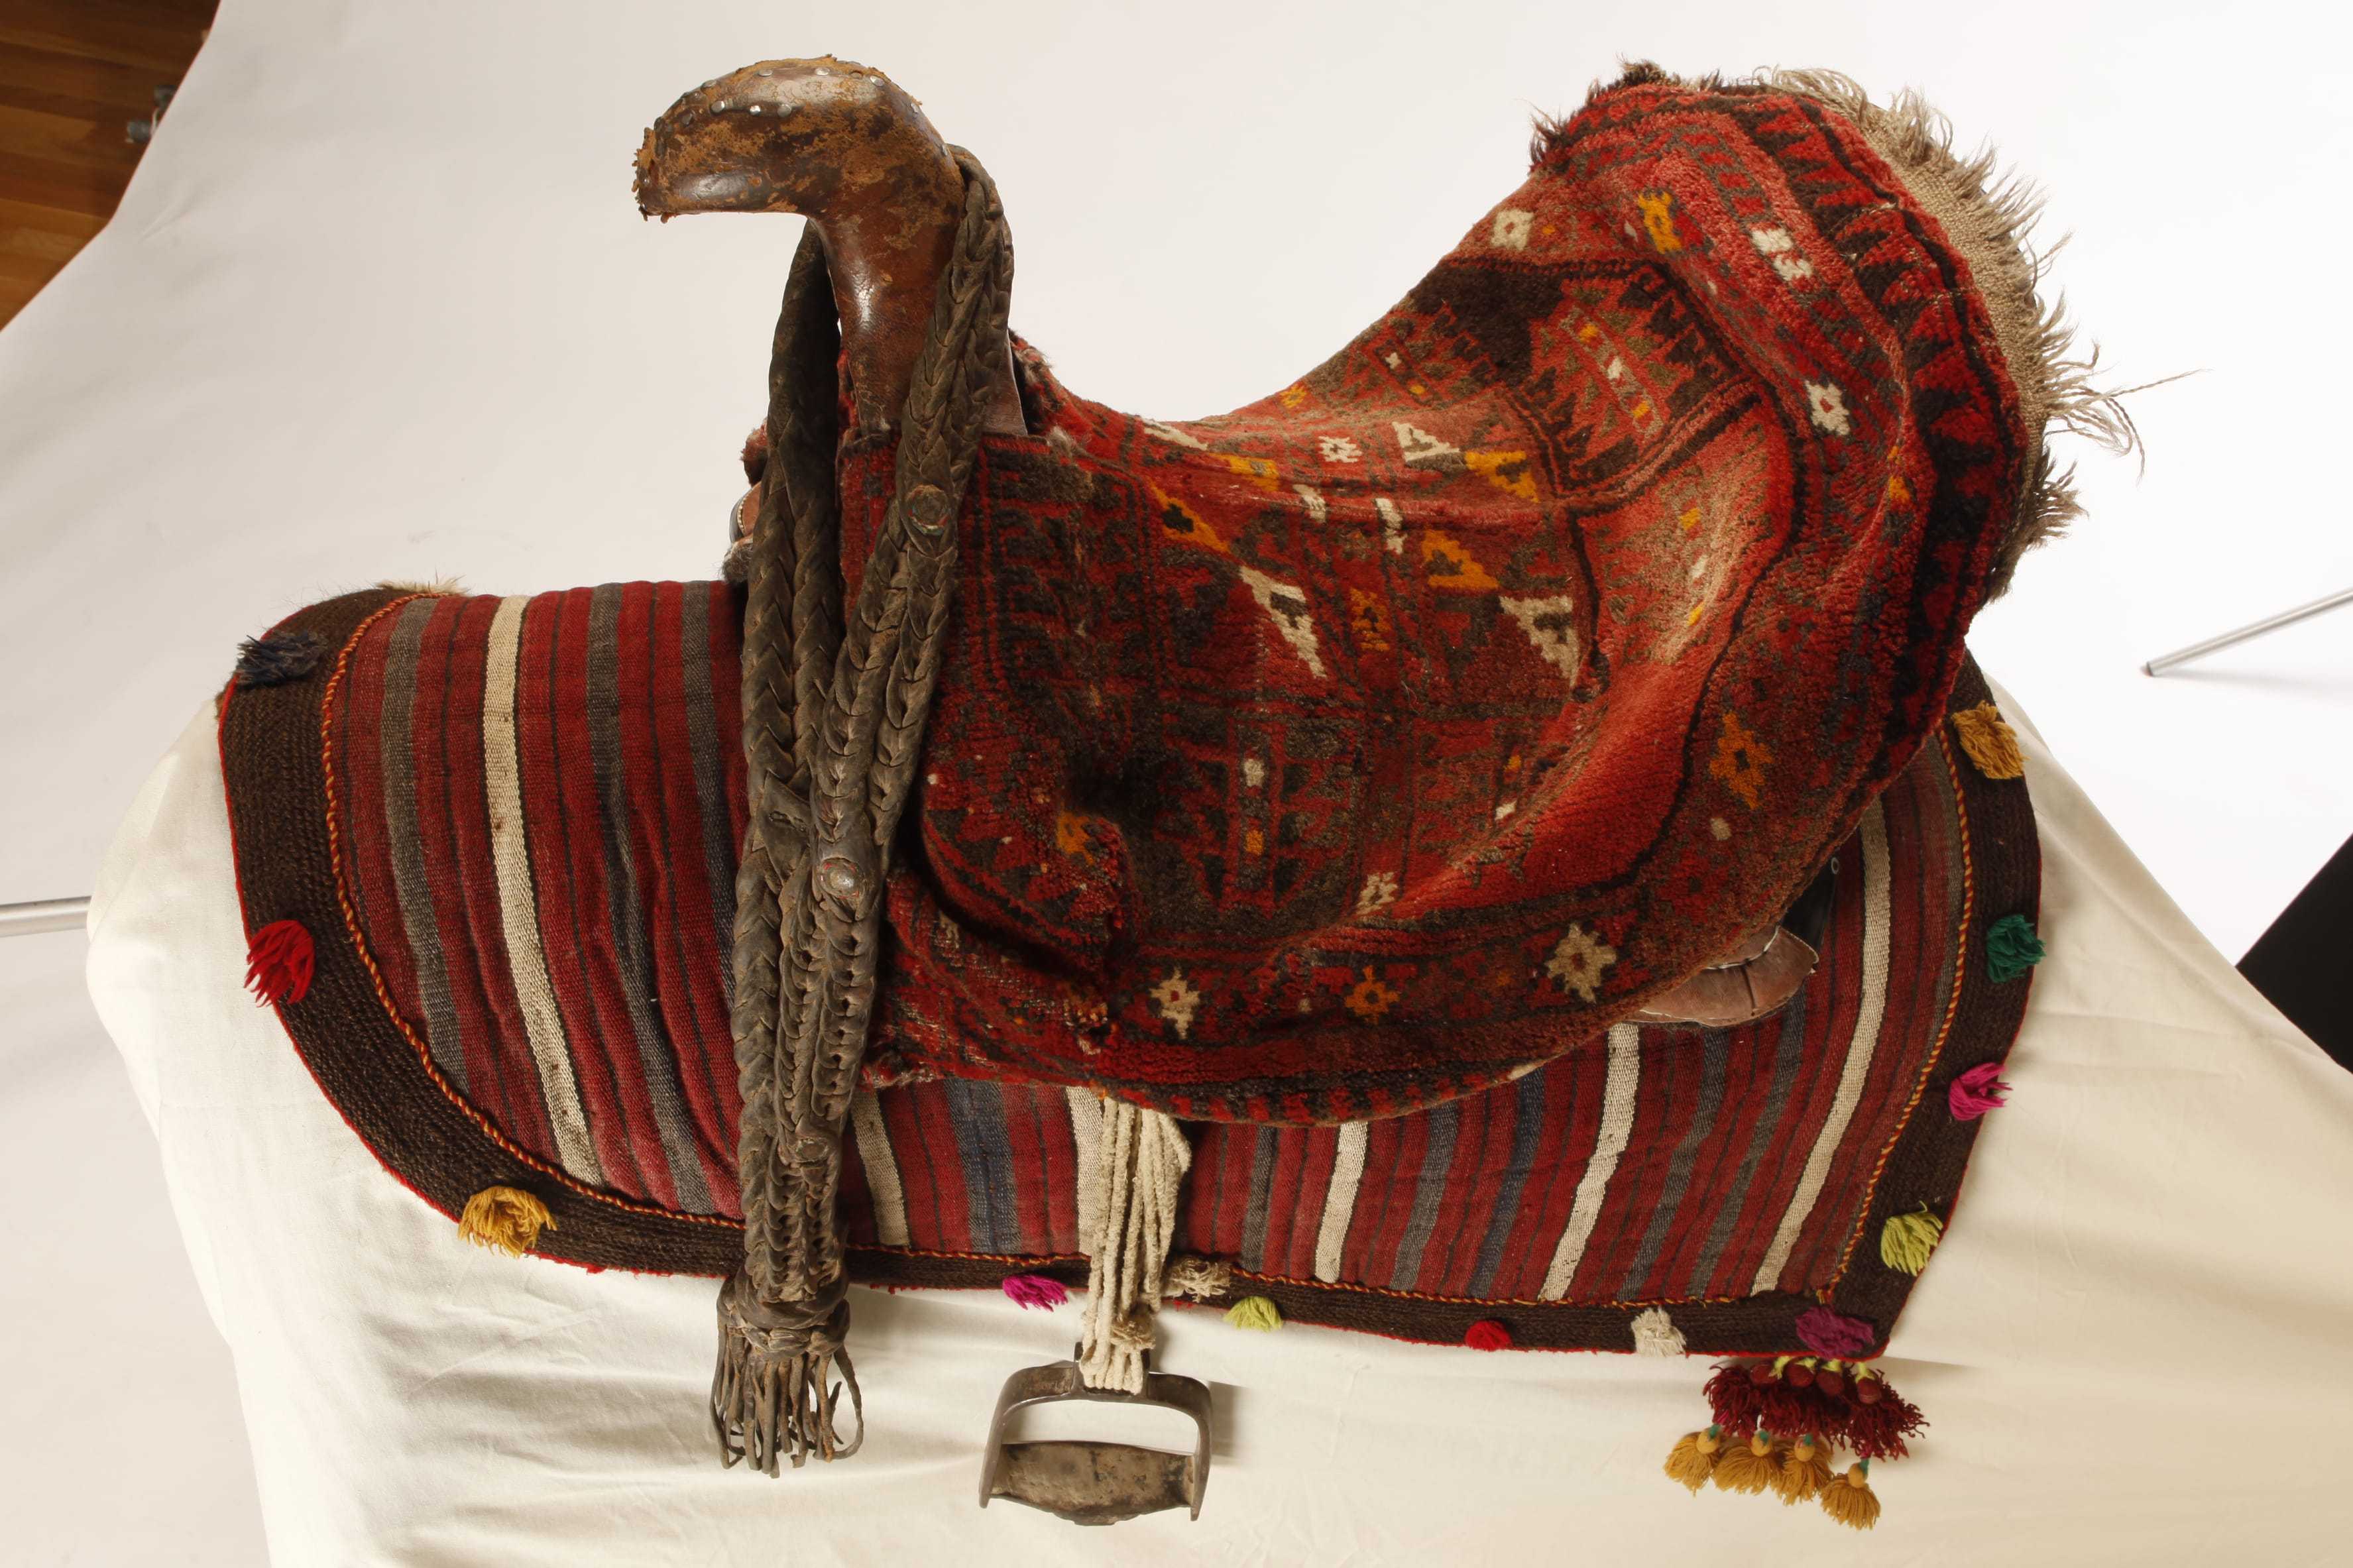 A saddle decorated with red woven cloth and tassels